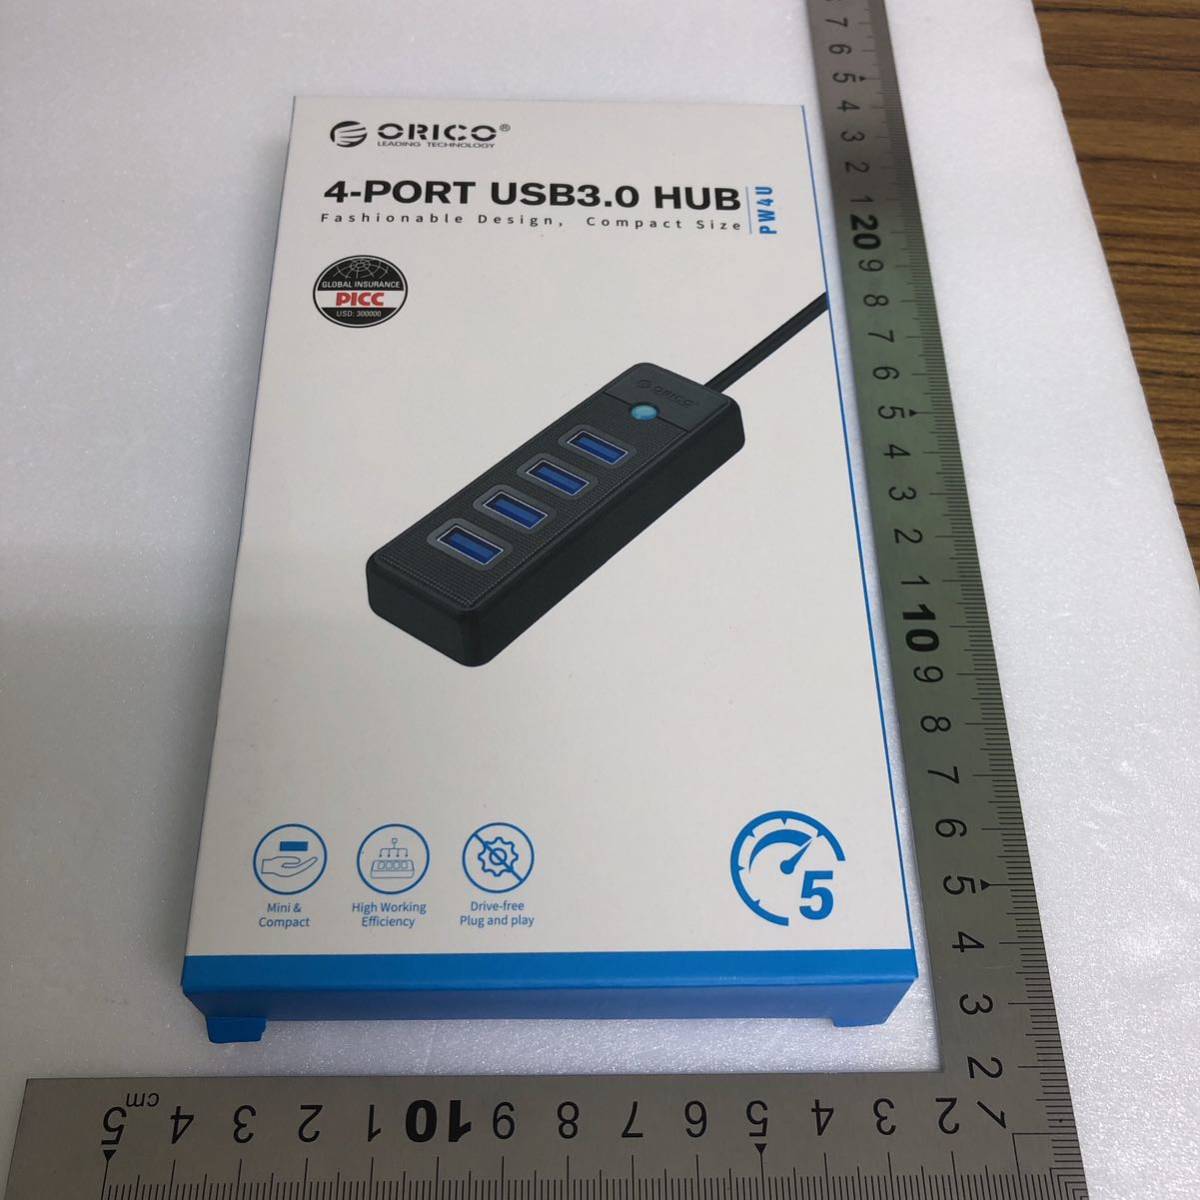 [ breaking the seal only ]ORICO *USB hub USB3.0 4 port hub bus power light weight 5Gbps high speed transfer Note PC correspondence Mac OS/Windows/Android/Linux correspondence 